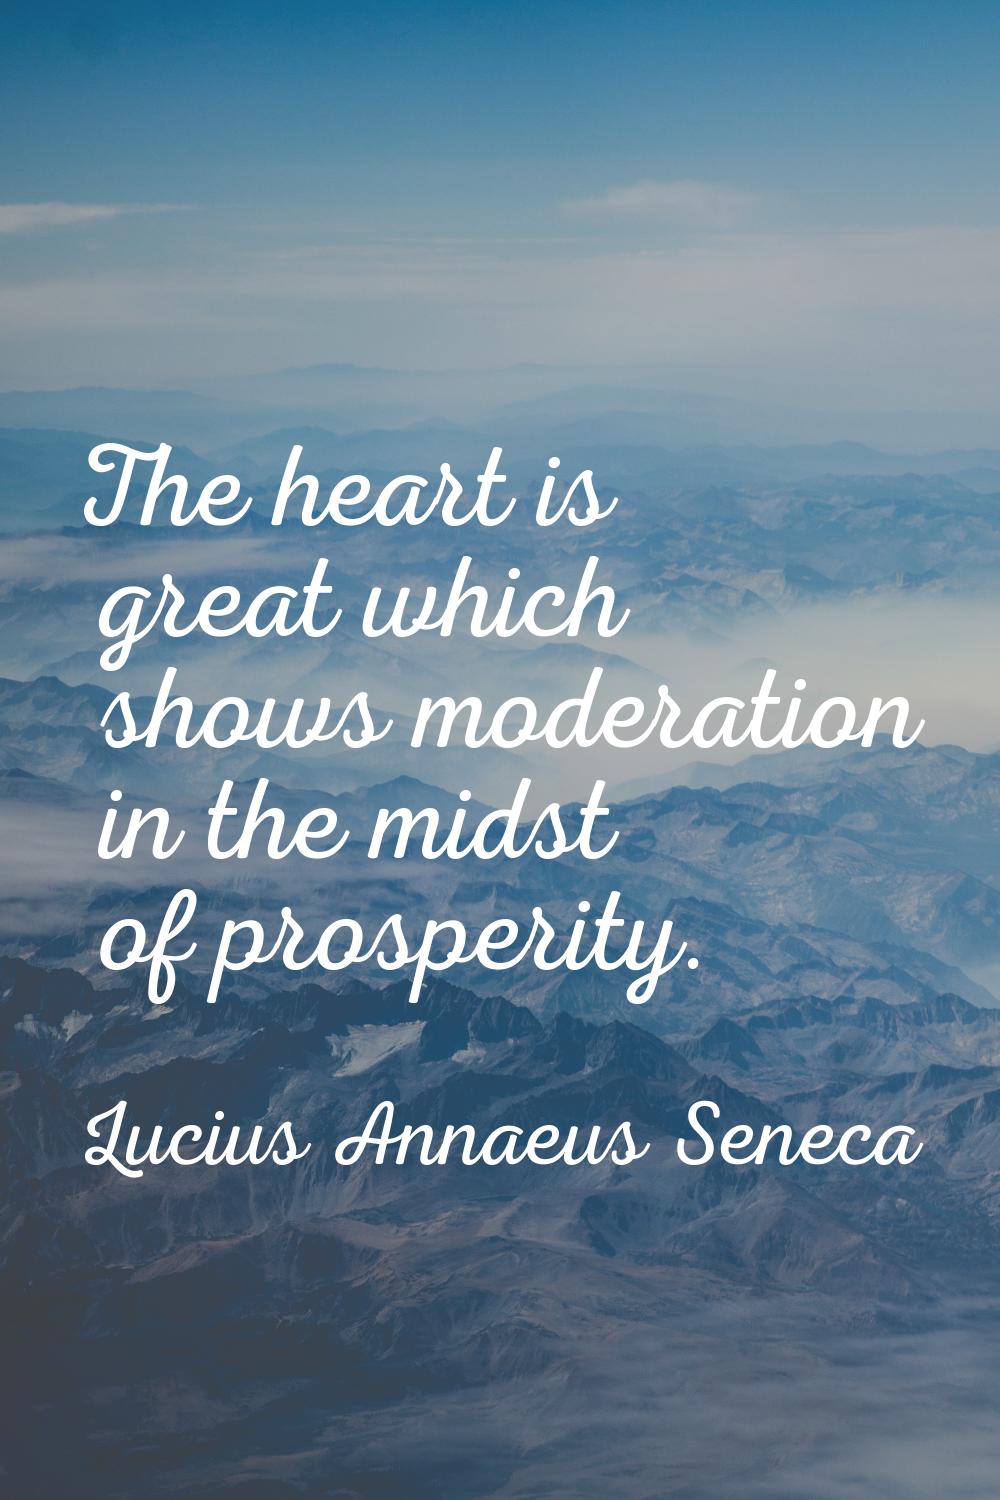 The heart is great which shows moderation in the midst of prosperity.